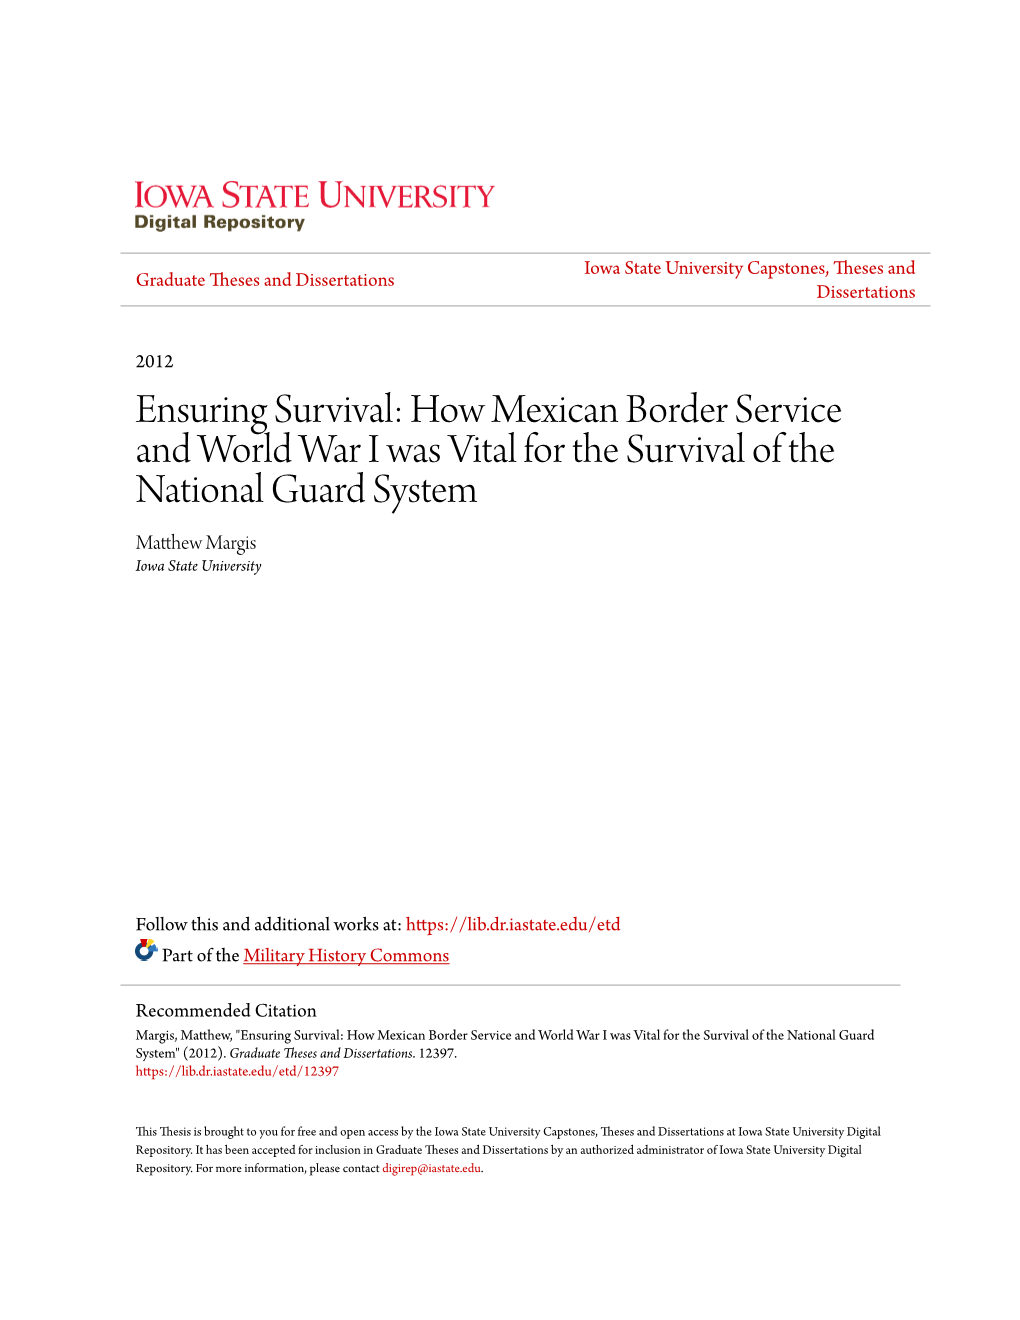 Ensuring Survival: How Mexican Border Service and World War I Was Vital for the Survival of the National Guard System Matthew Am Rgis Iowa State University